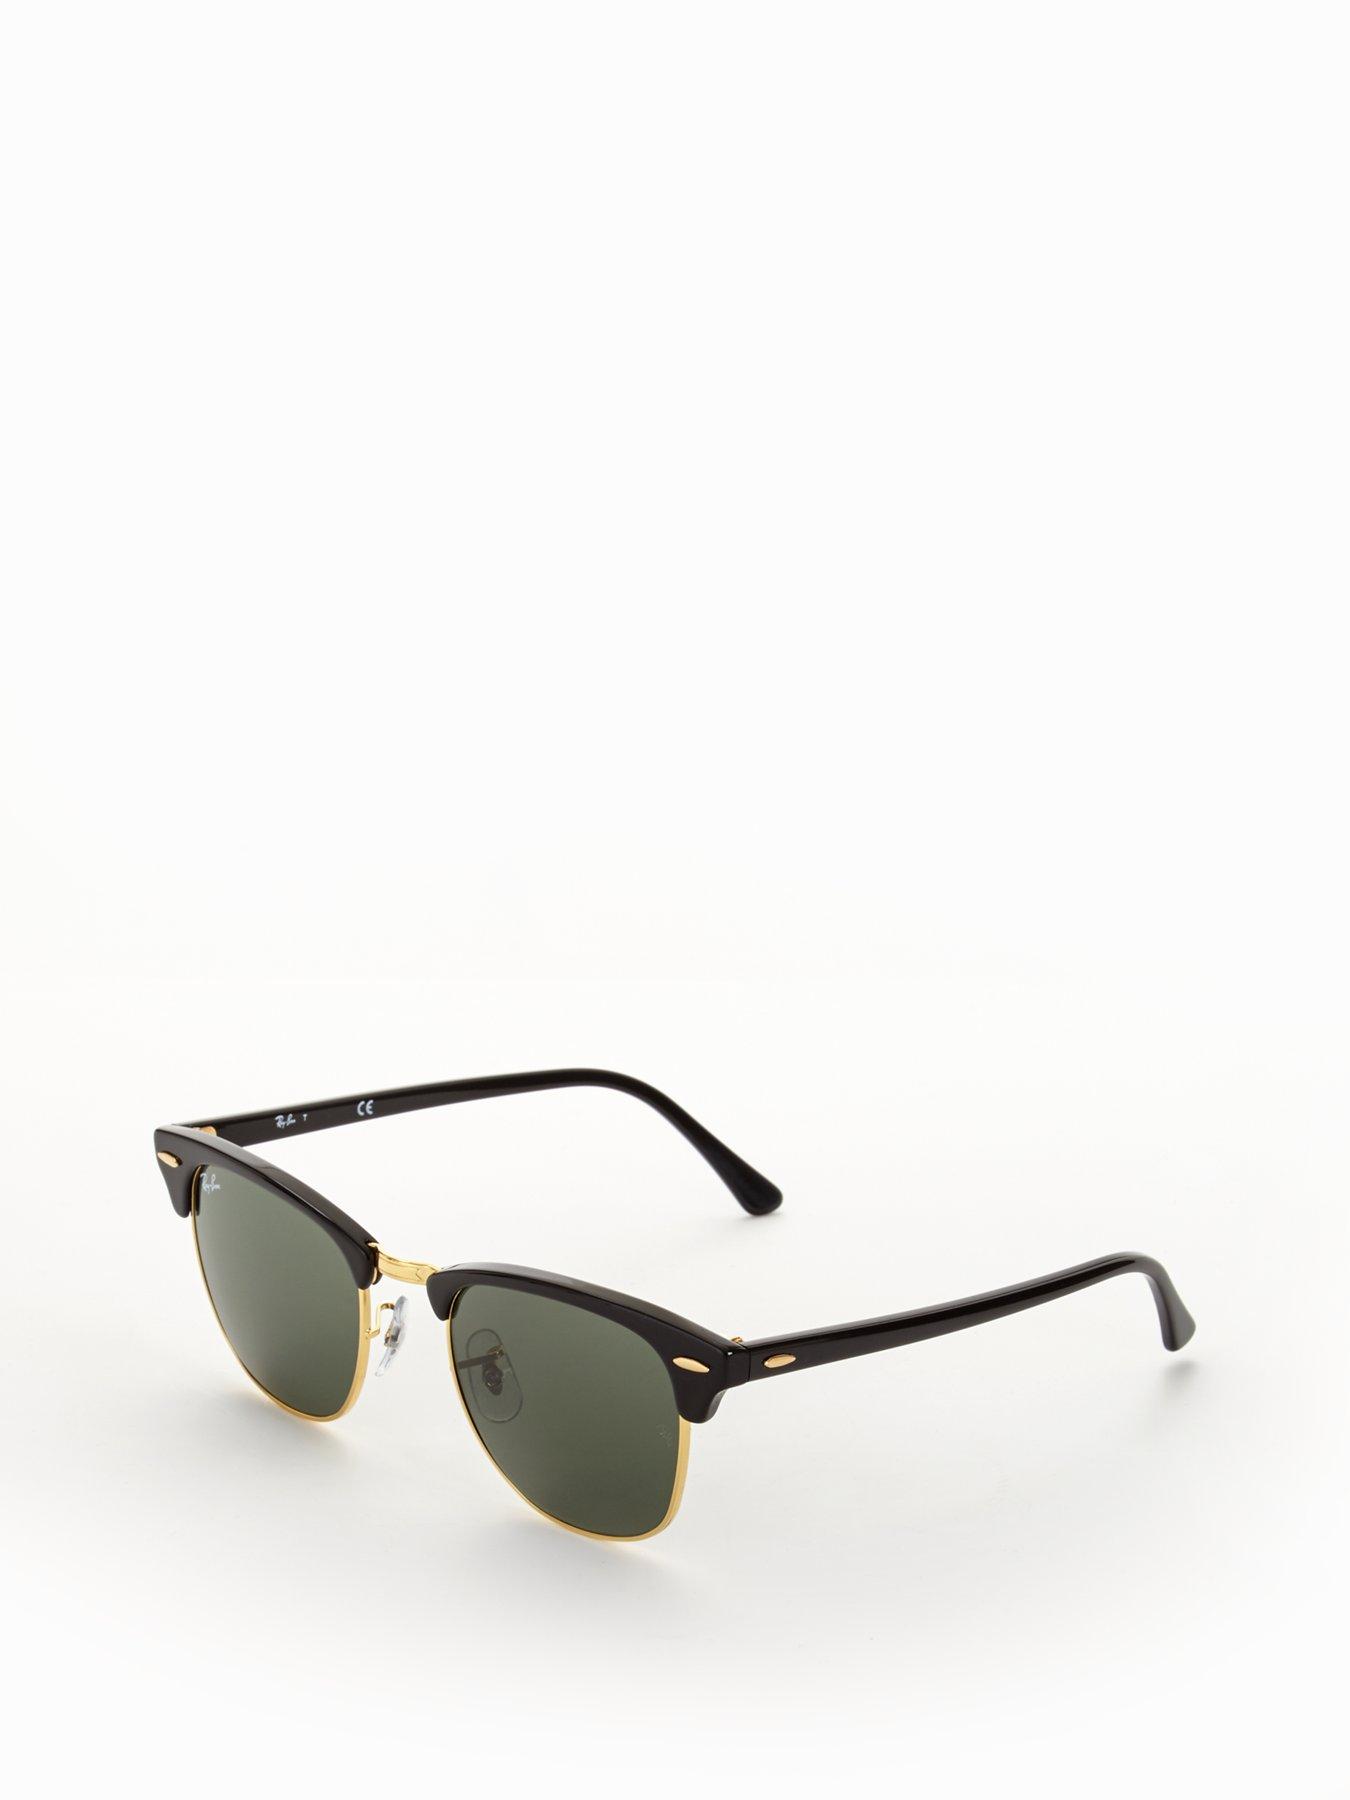 Ray Ban Clubmaster Sunglasses Littlewoods Com